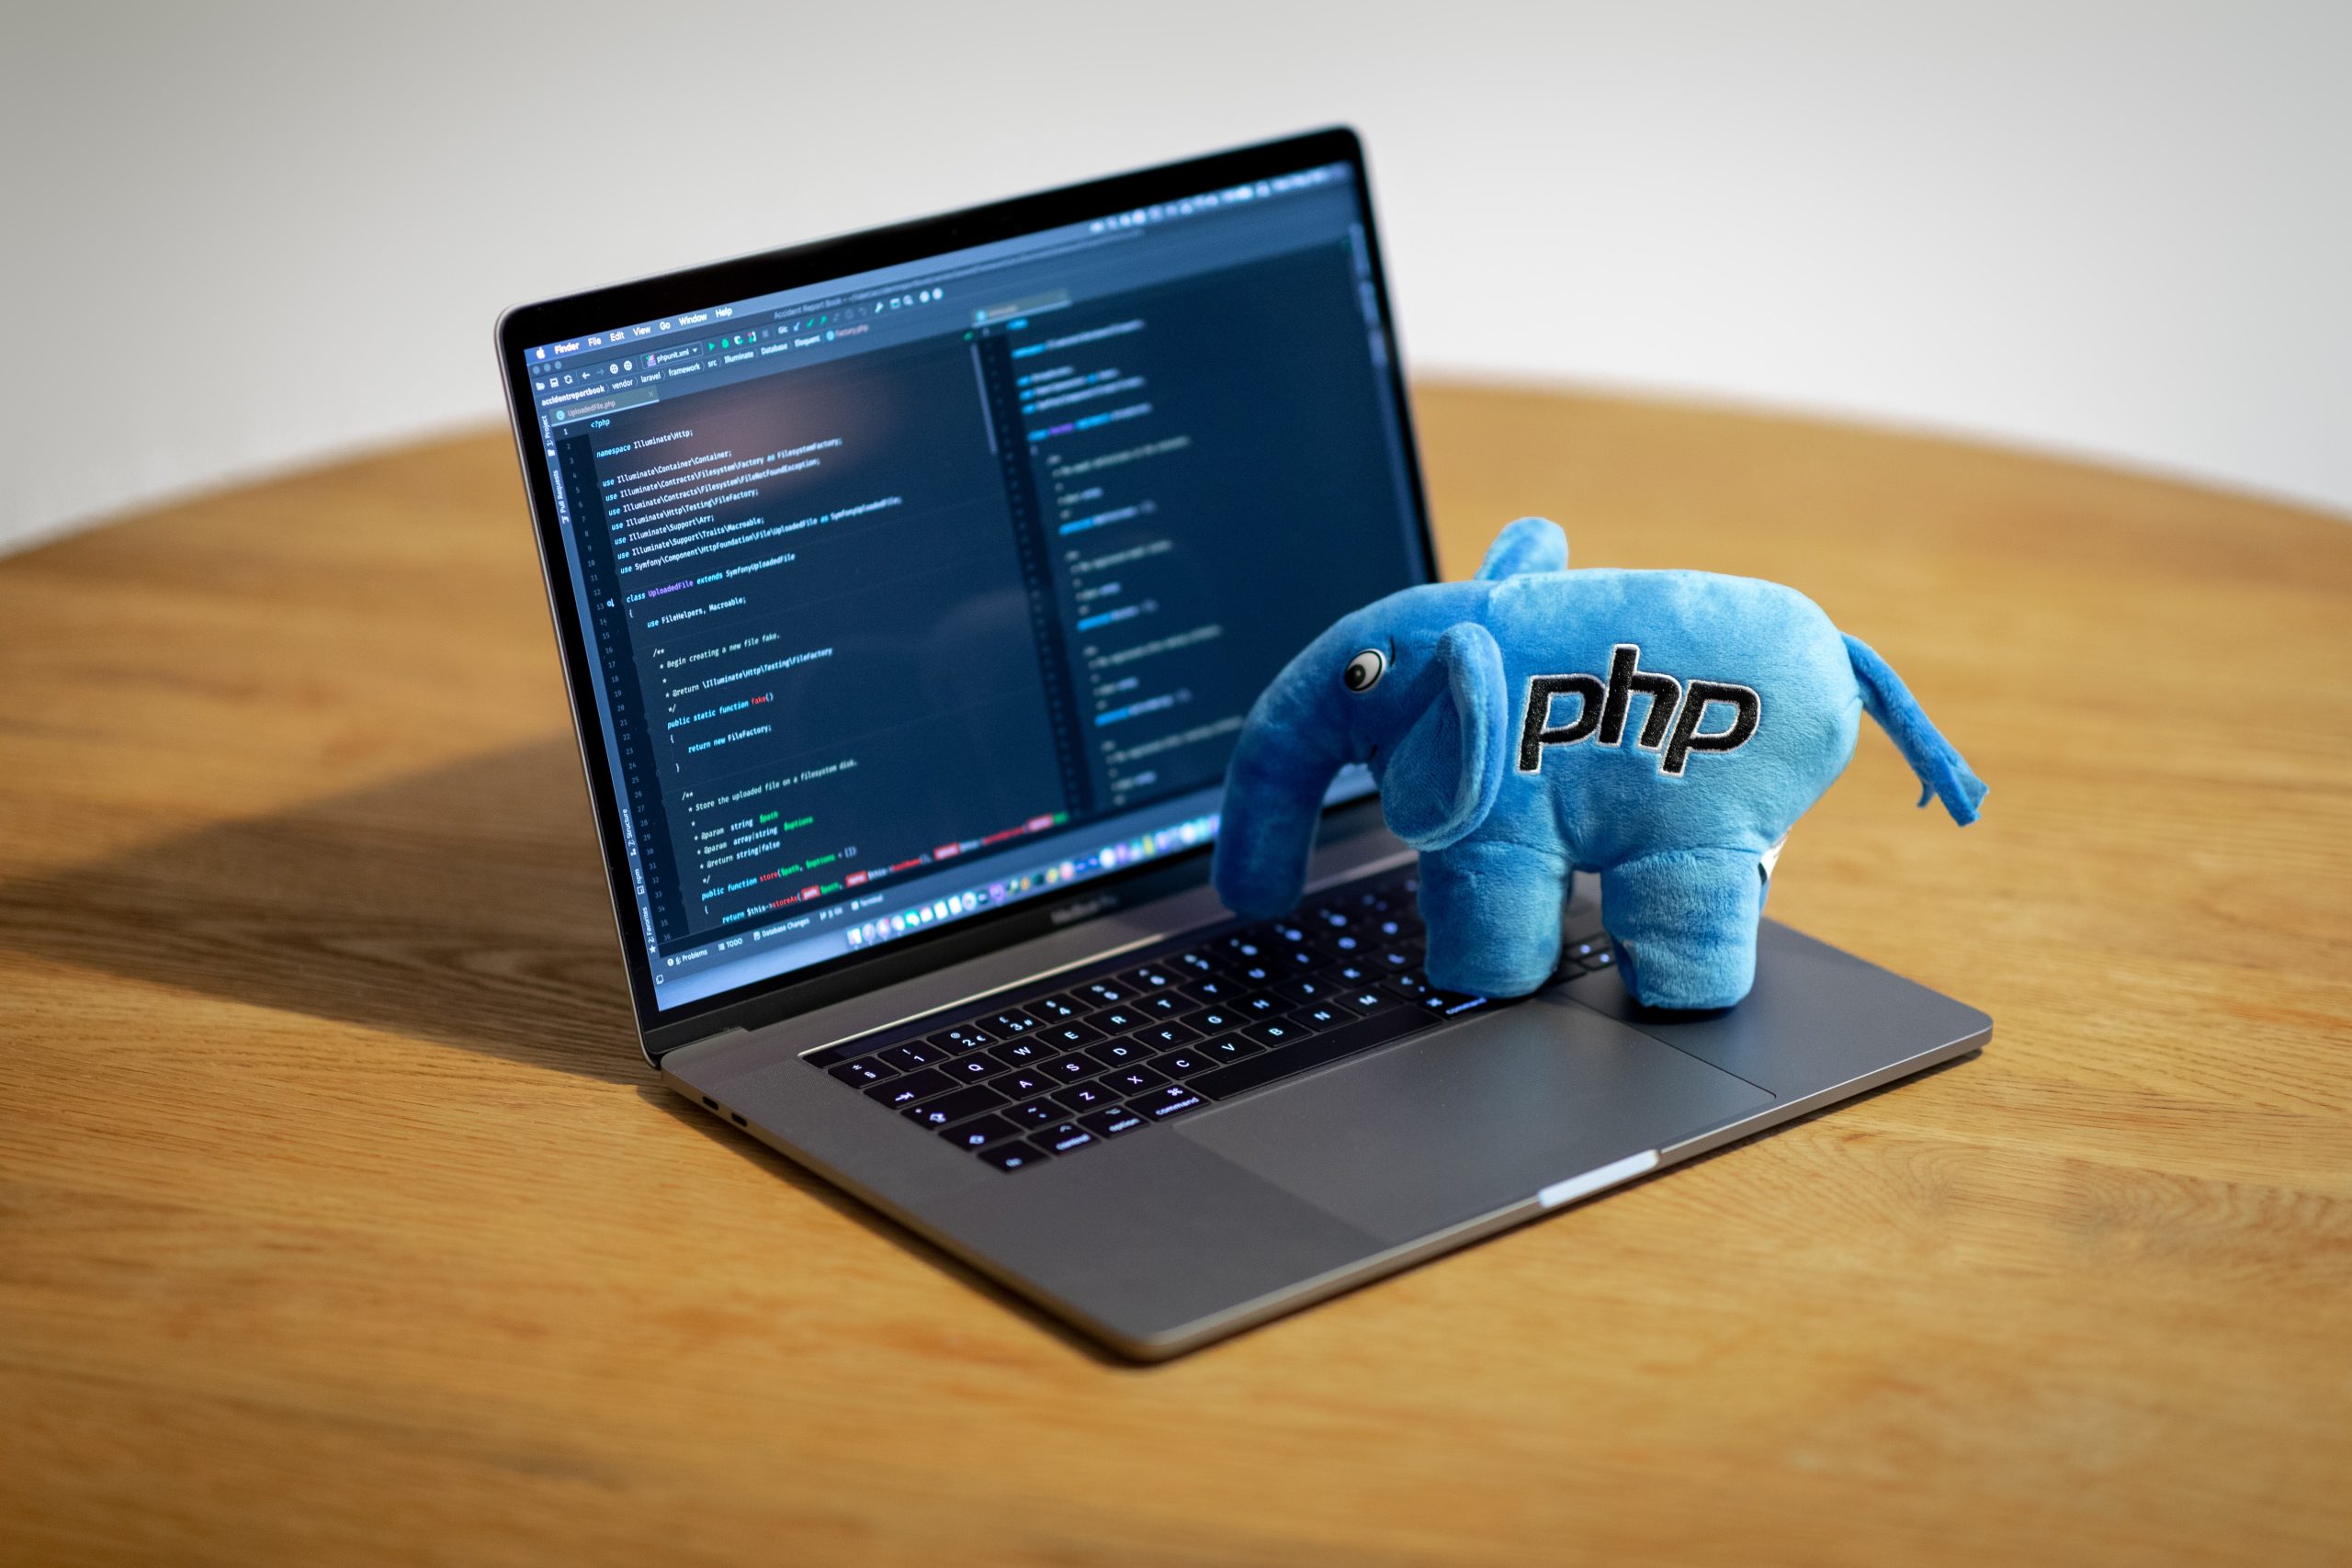 Will PHP’s popularity grow compared to other programming languages in 2023?